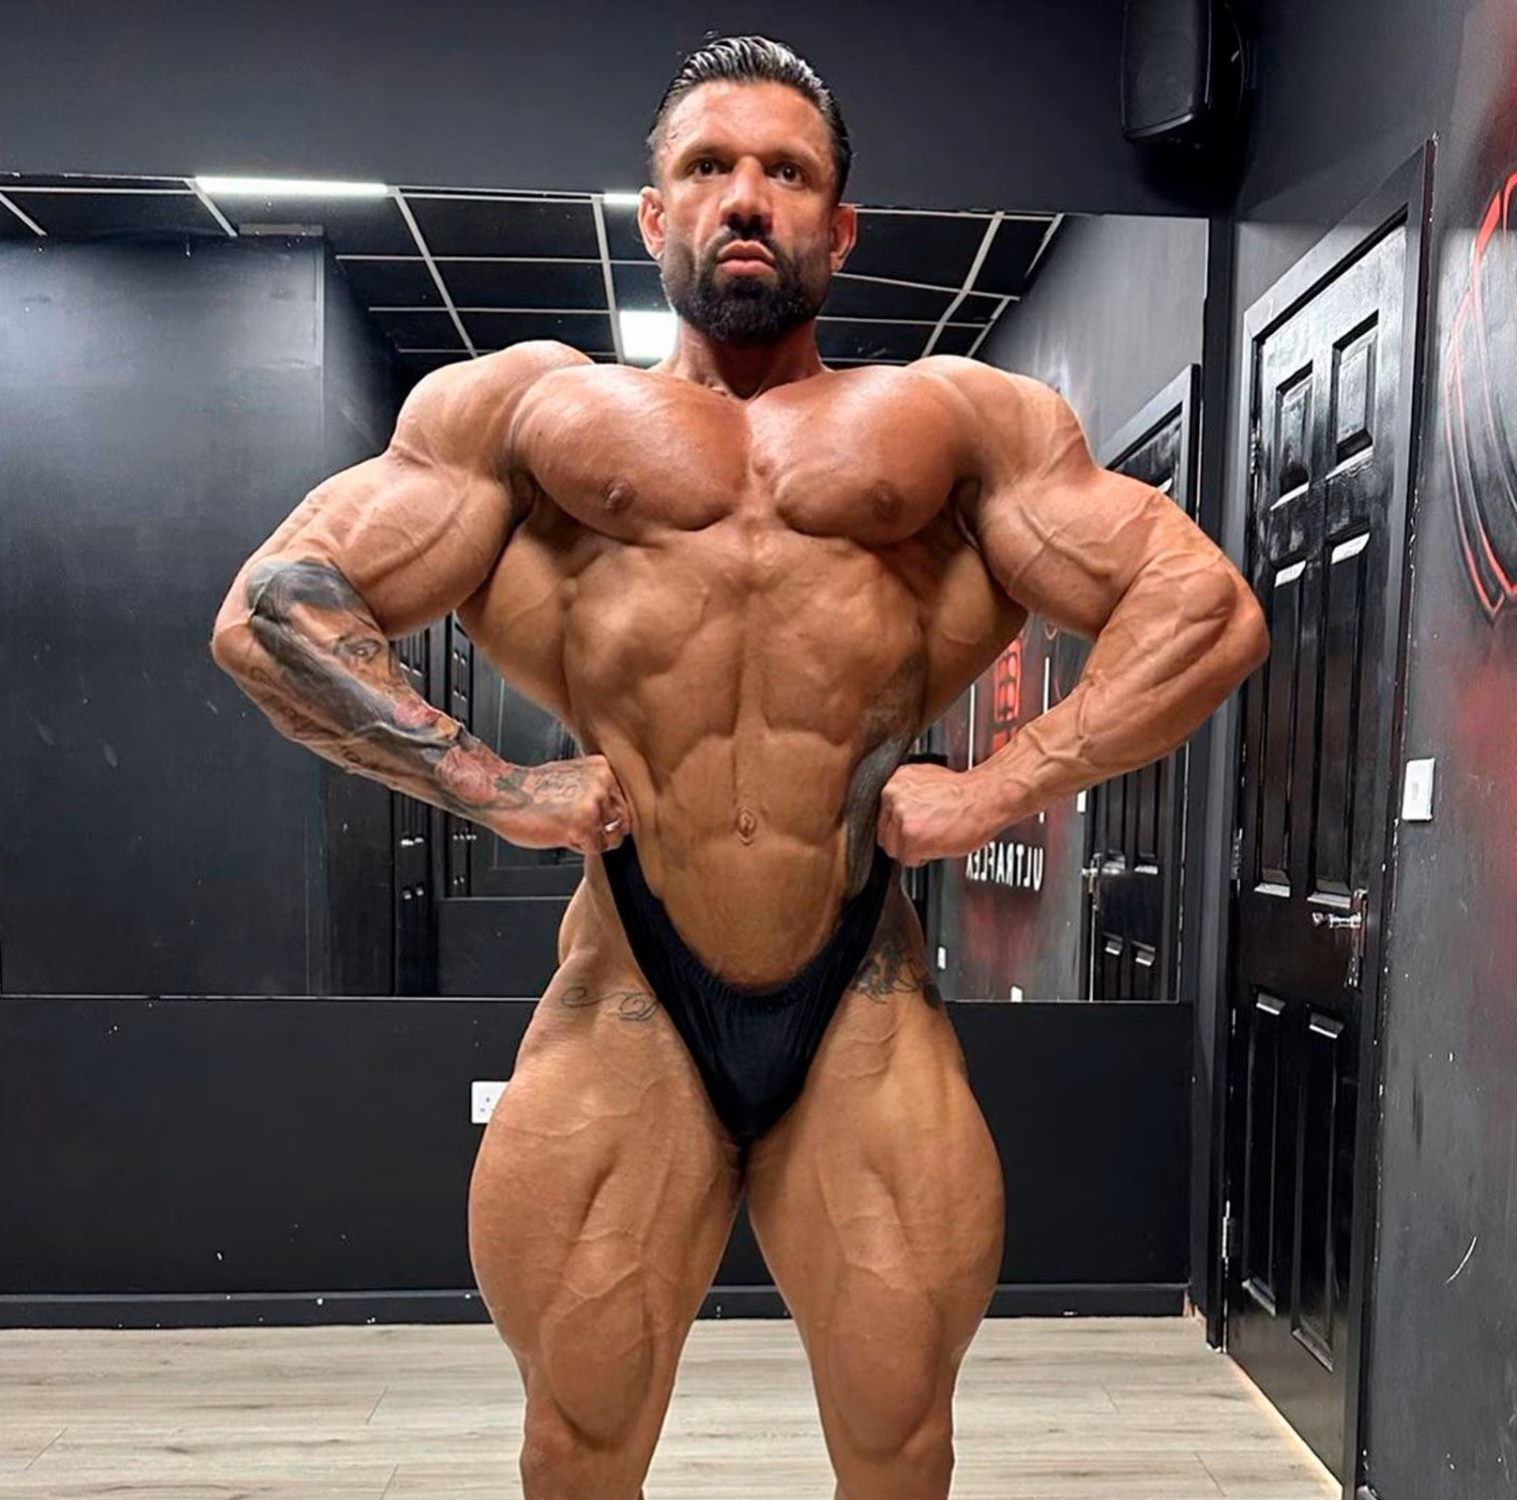 Fisicoculturista Neil Currey, Mr. Olympia Competitor, Passes Away At 34